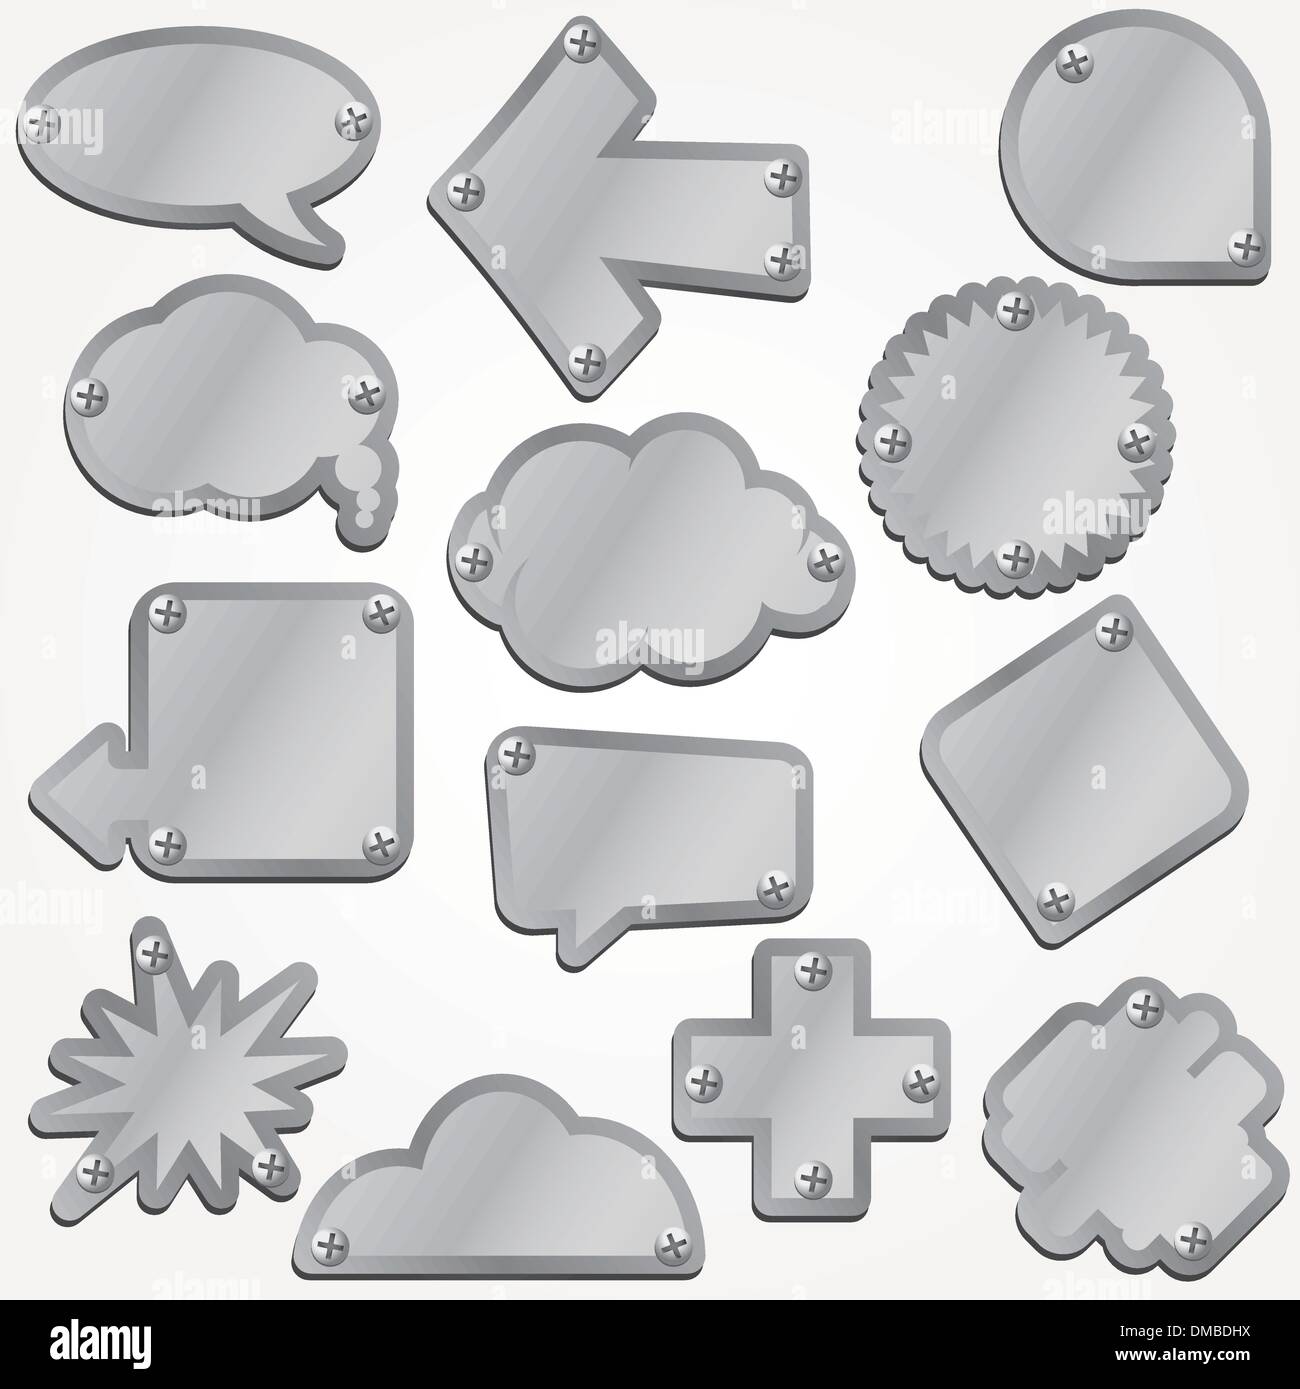 Vector Old plates and signboards with symbols Stock Vector